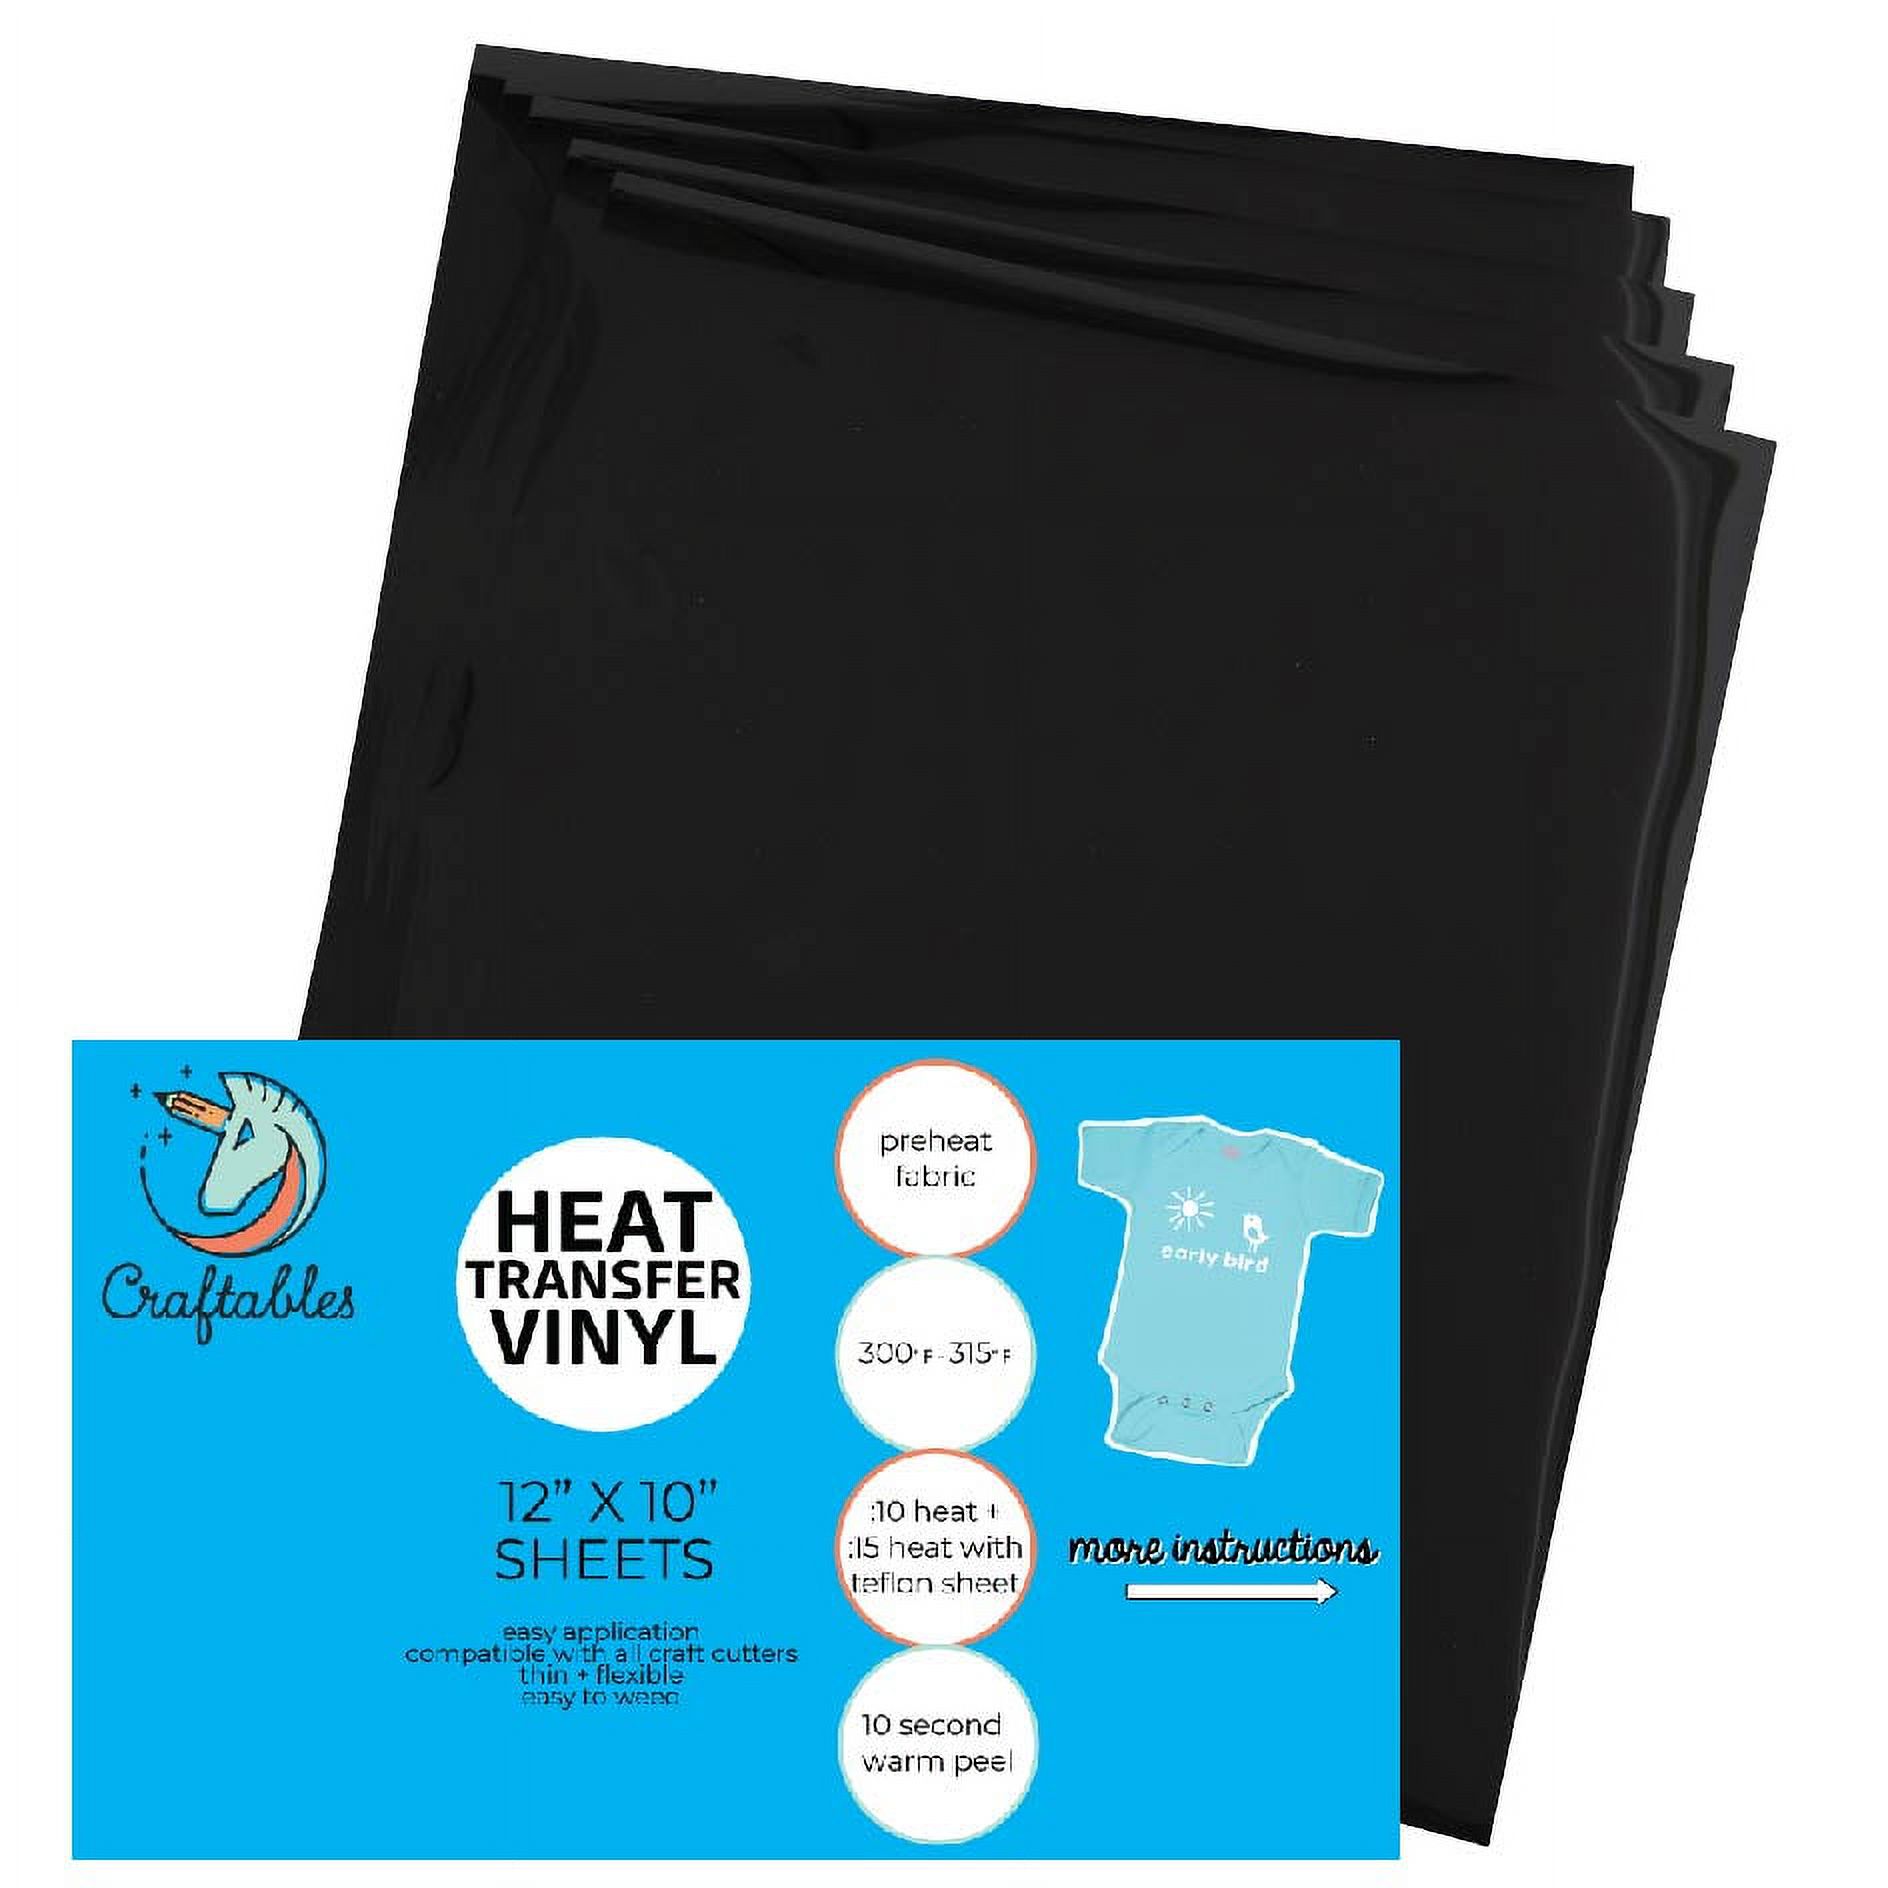 Craftables Black Heat Transfer Vinyl HTV - 5 Sheets Easy to Tshirt Iron on  Vinyl for Silhouette Cameo, Cricut, all Craft Cutters. Ships Flat 